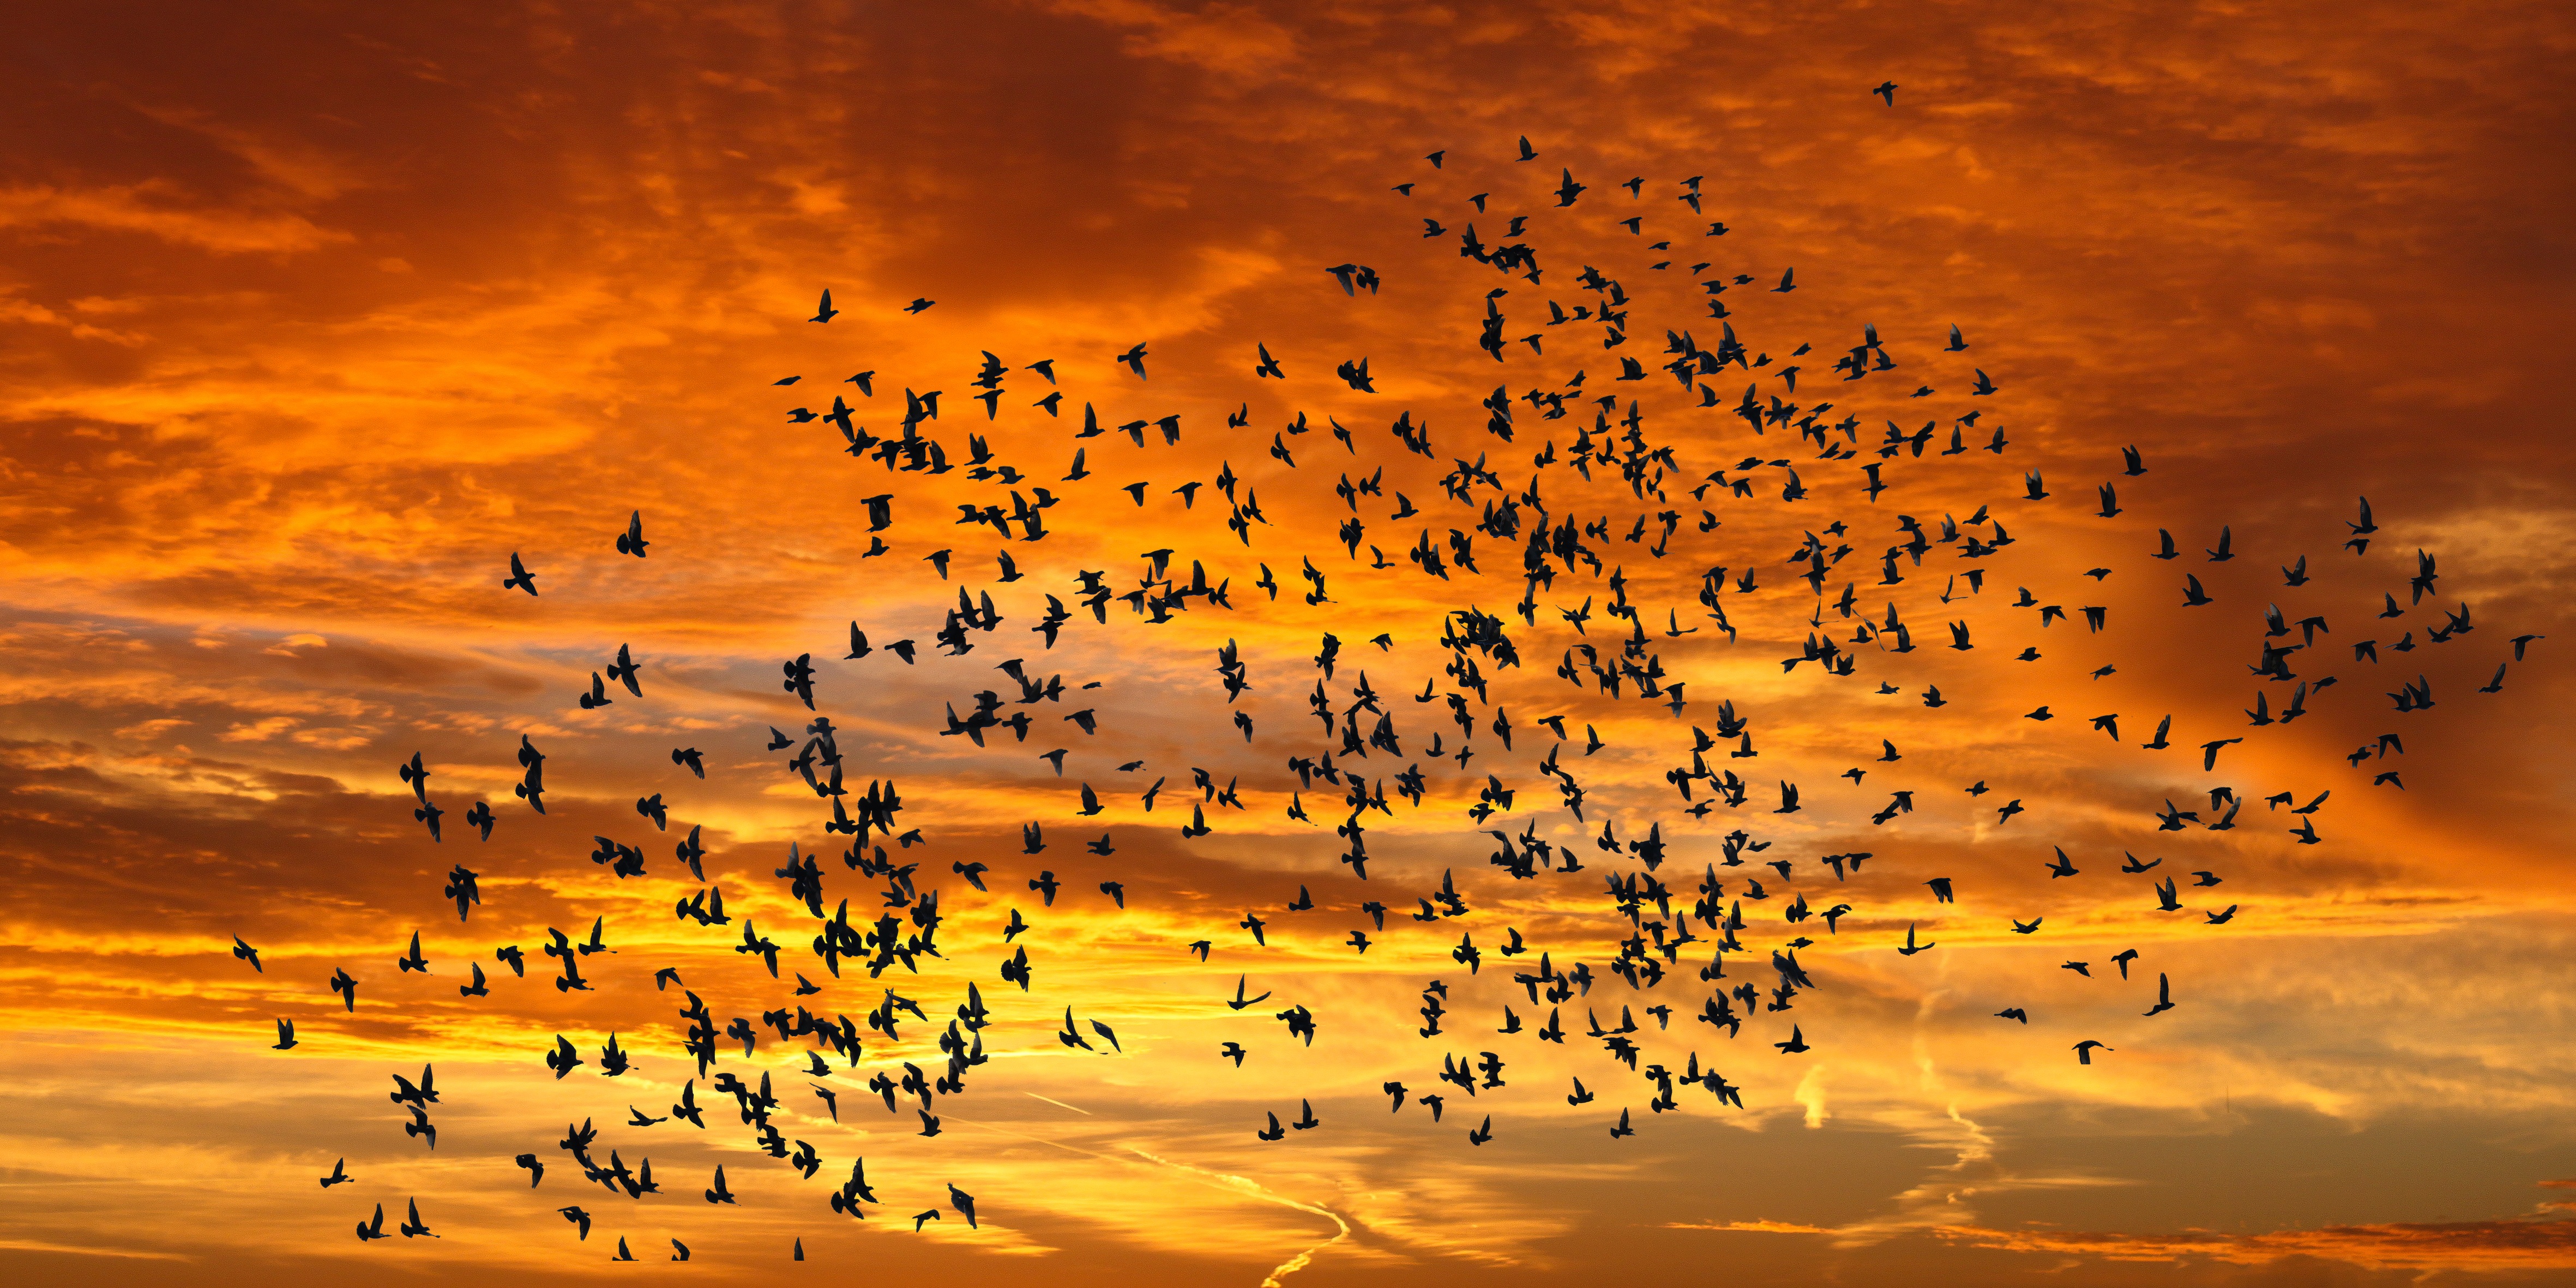 Full HD sunset, nature, birds, sky, clouds, silhouettes, flight